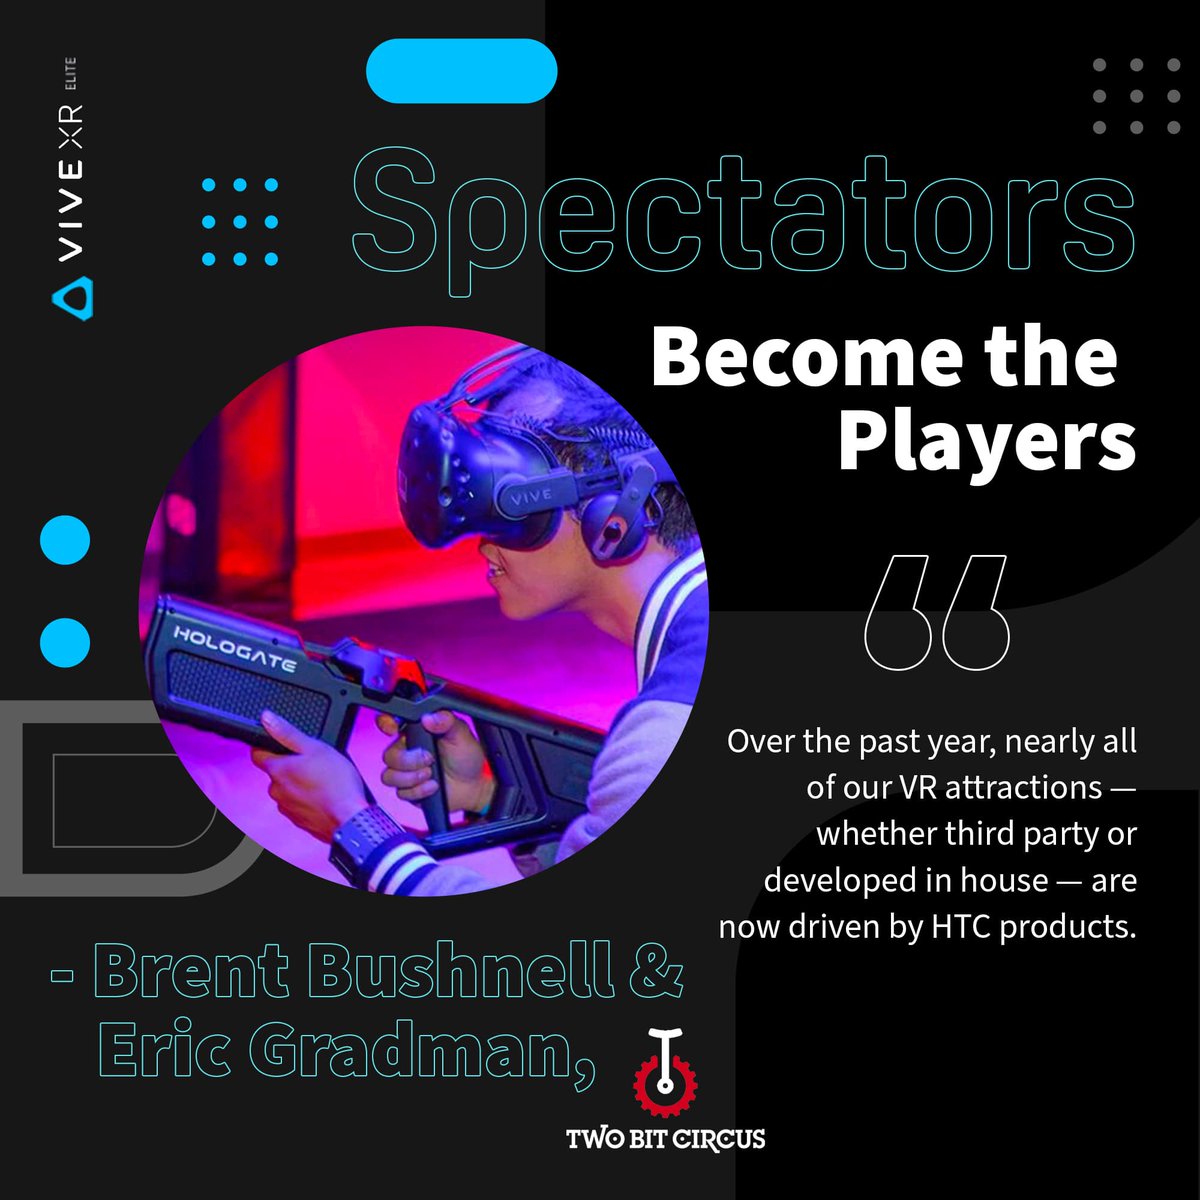 Two Bit Circus describes the role of VIVE and elbow-to-elbow play in creating a more universal VR experience. Learn more here: htcvive.co/SBPX #TWOBITCIRCUS #LBE #LOCATIONBASEDENTERTAINMENT #VR #VIRTUALREALITY #VREXPERIENCE #VRATTRACTION #ESPORTS